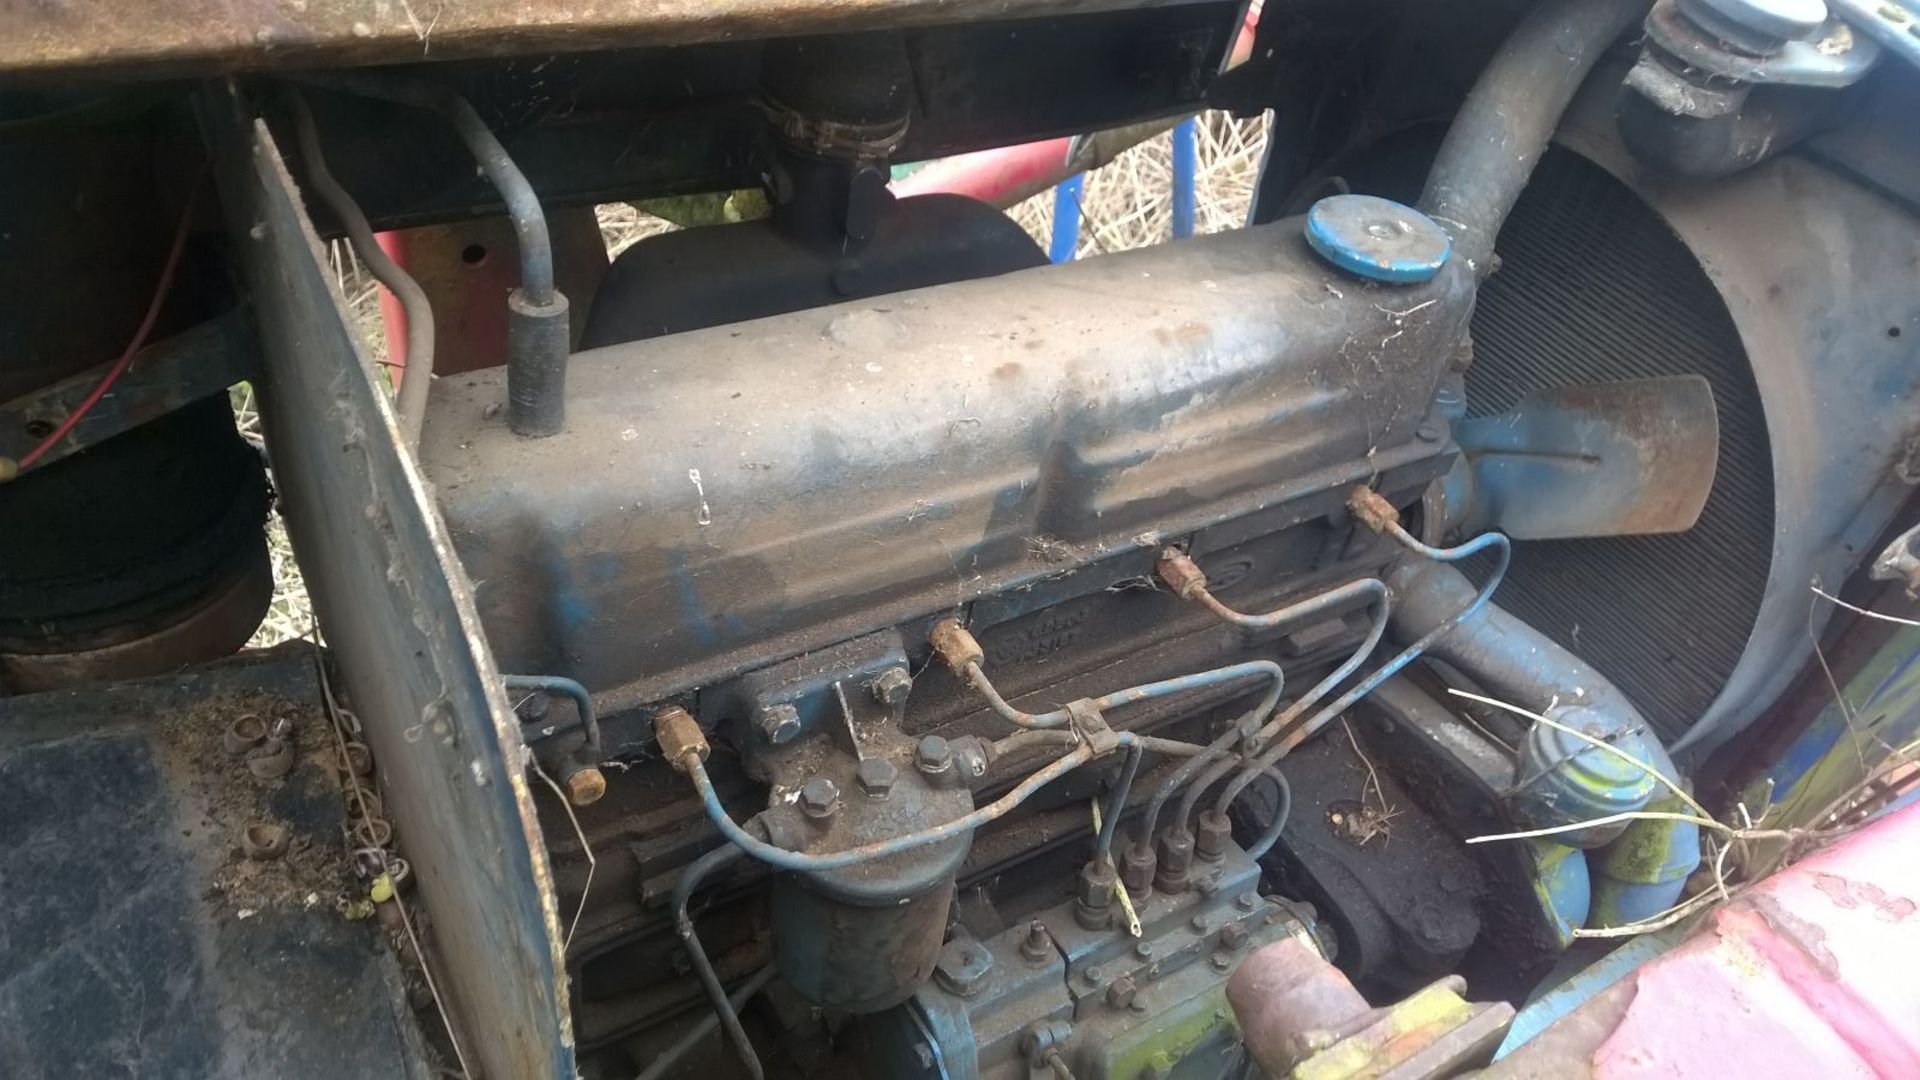 FORDSON  SUPER MAJOR c/w POWER LOADER   WE HAVENT HEARD IT RUNNING YET BUT WE ARE INTENDING TO GET - Image 8 of 20